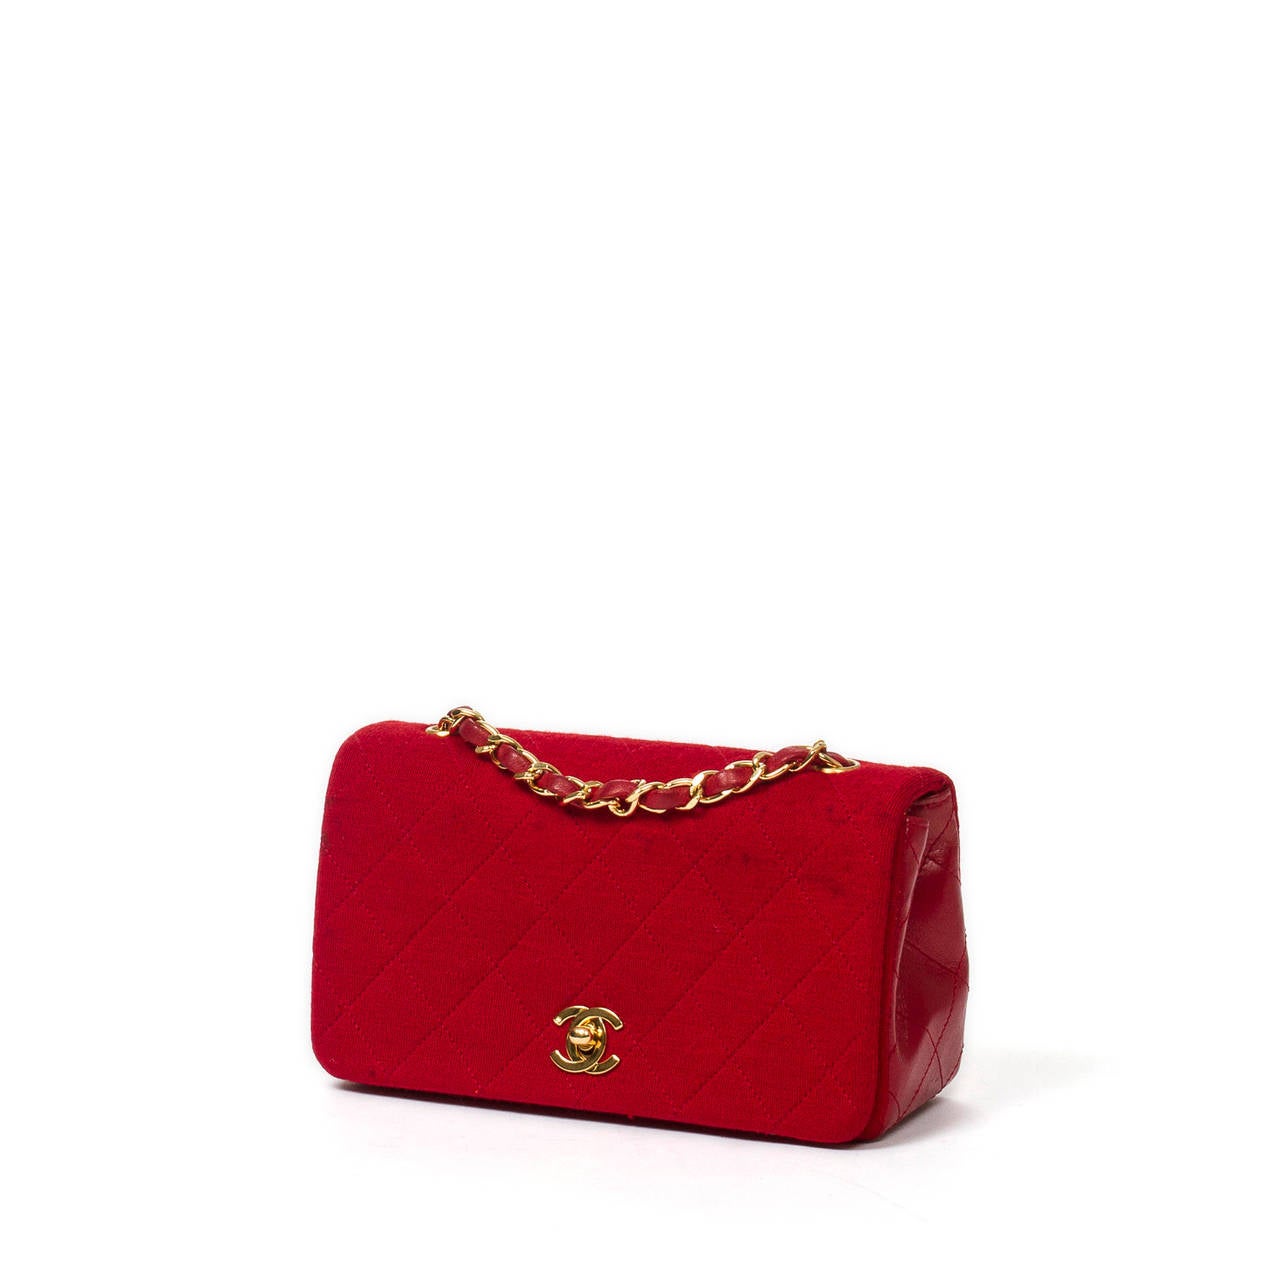 Chanel Vintage shoulder bag in red quilted jersey with red quilted leather sides, gold tone chain strap interlaced with red leather, CC turnlock. Red leather lined interior with 3 slip pockets. Box, dustbag, authenticity card and sticker included.